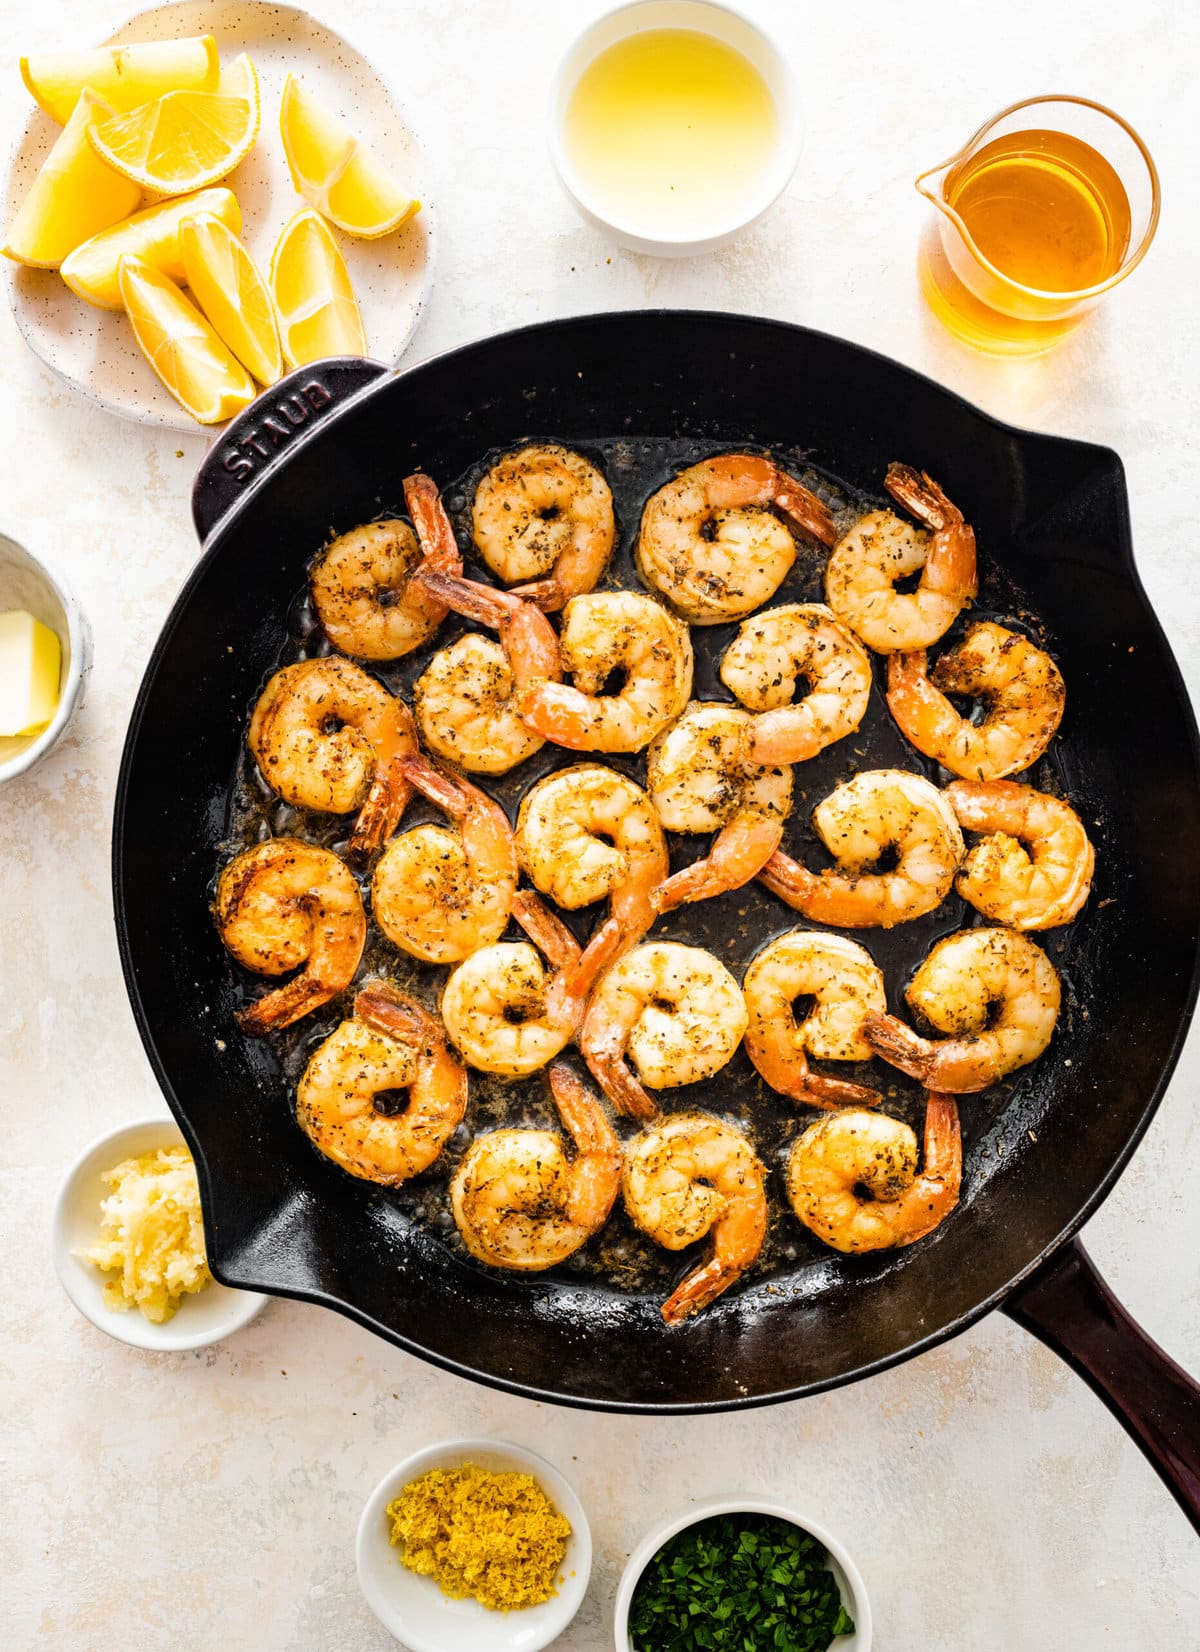 How to make easy pan seared shrimp step-by-step: searing the shrimp on both sides.